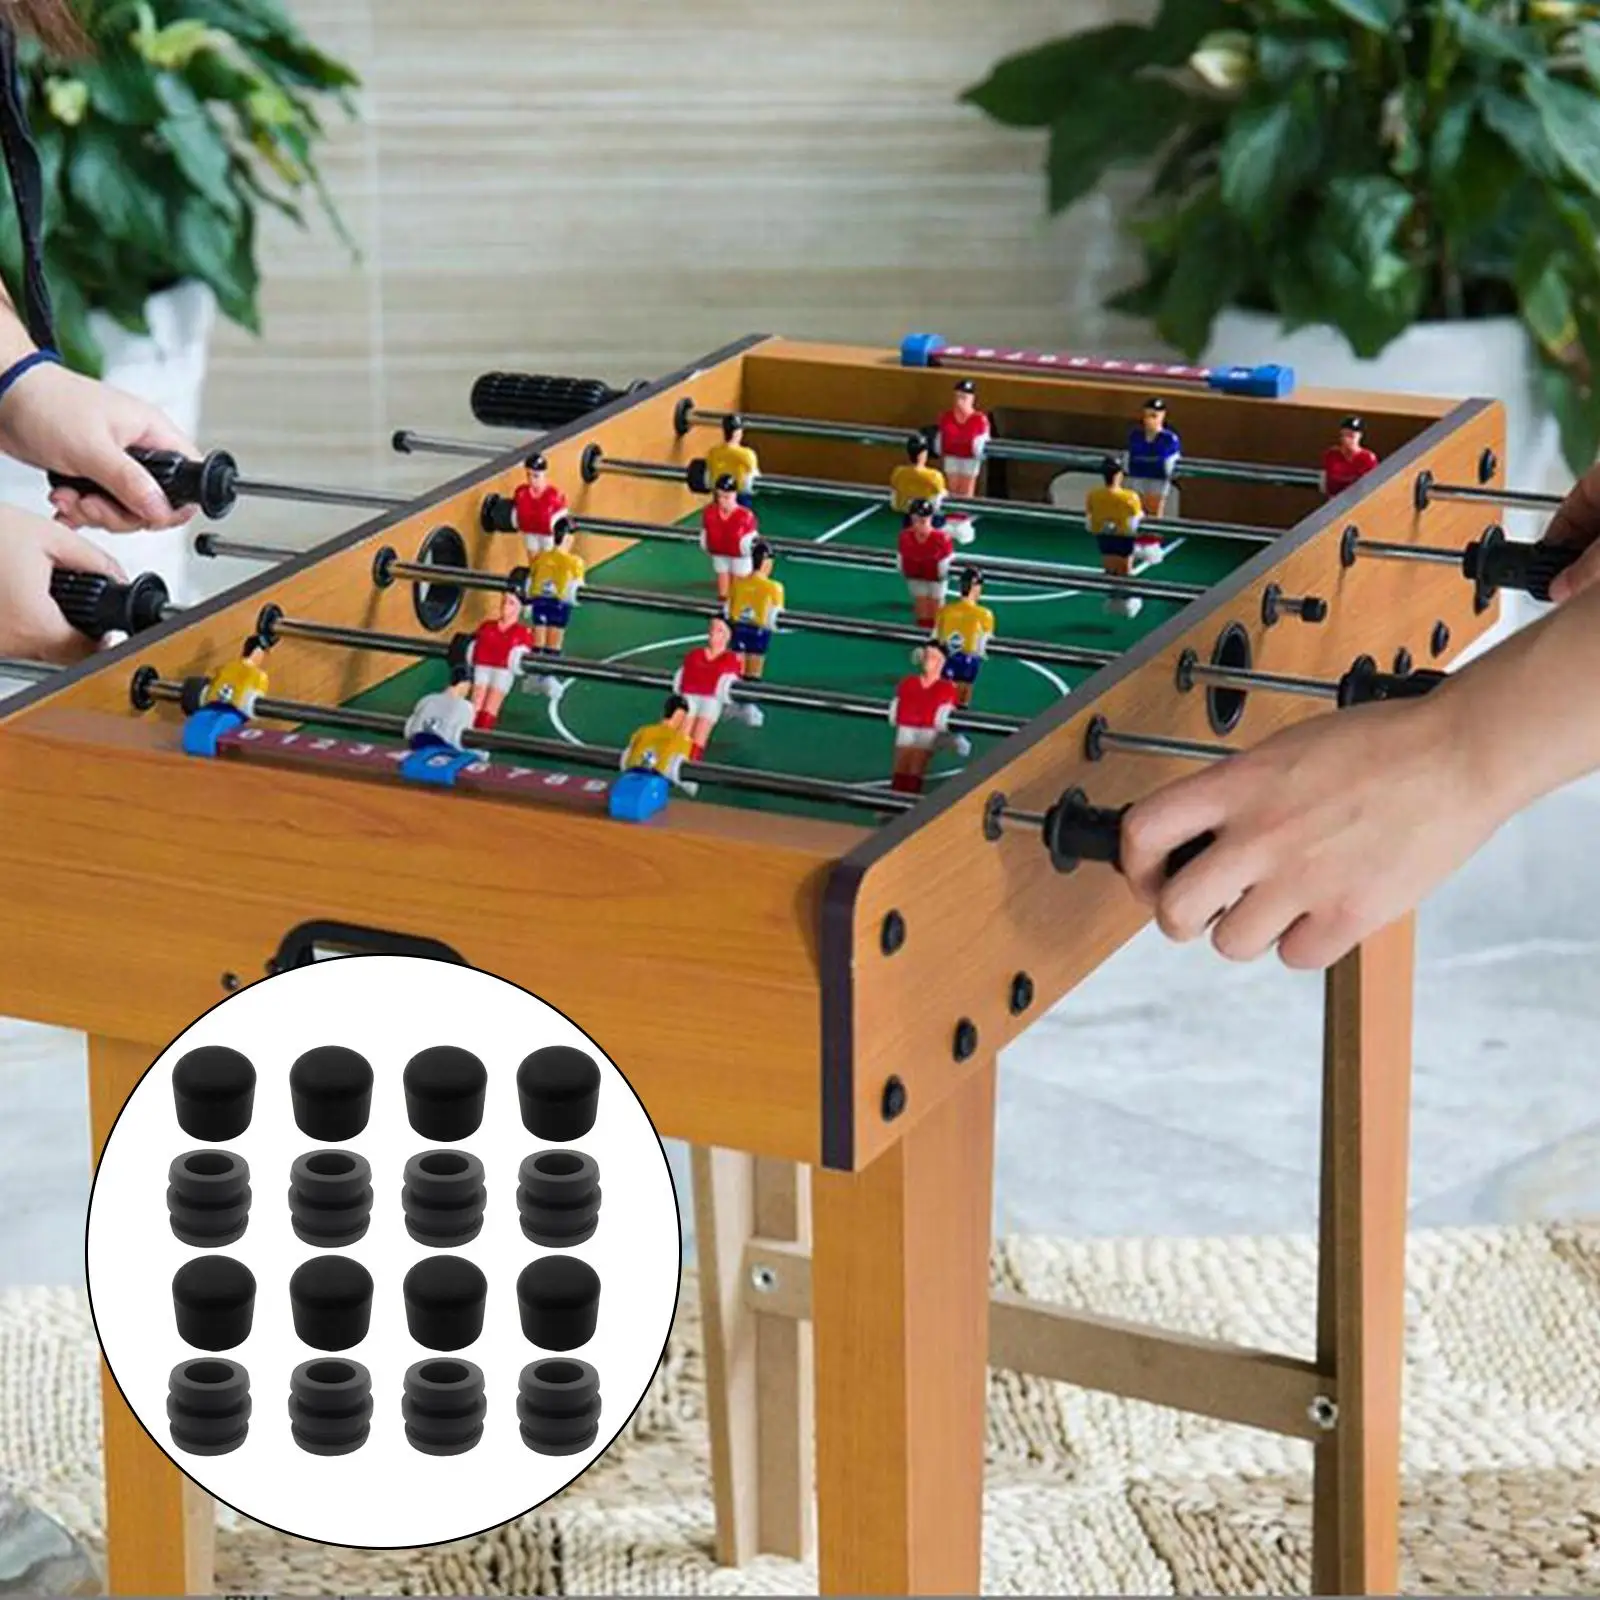 Rod Bumpers End Caps Accessories Fussball Durable Table Soccer Standard Foosball Tables Replacement Universal Rod Bumper Buffer